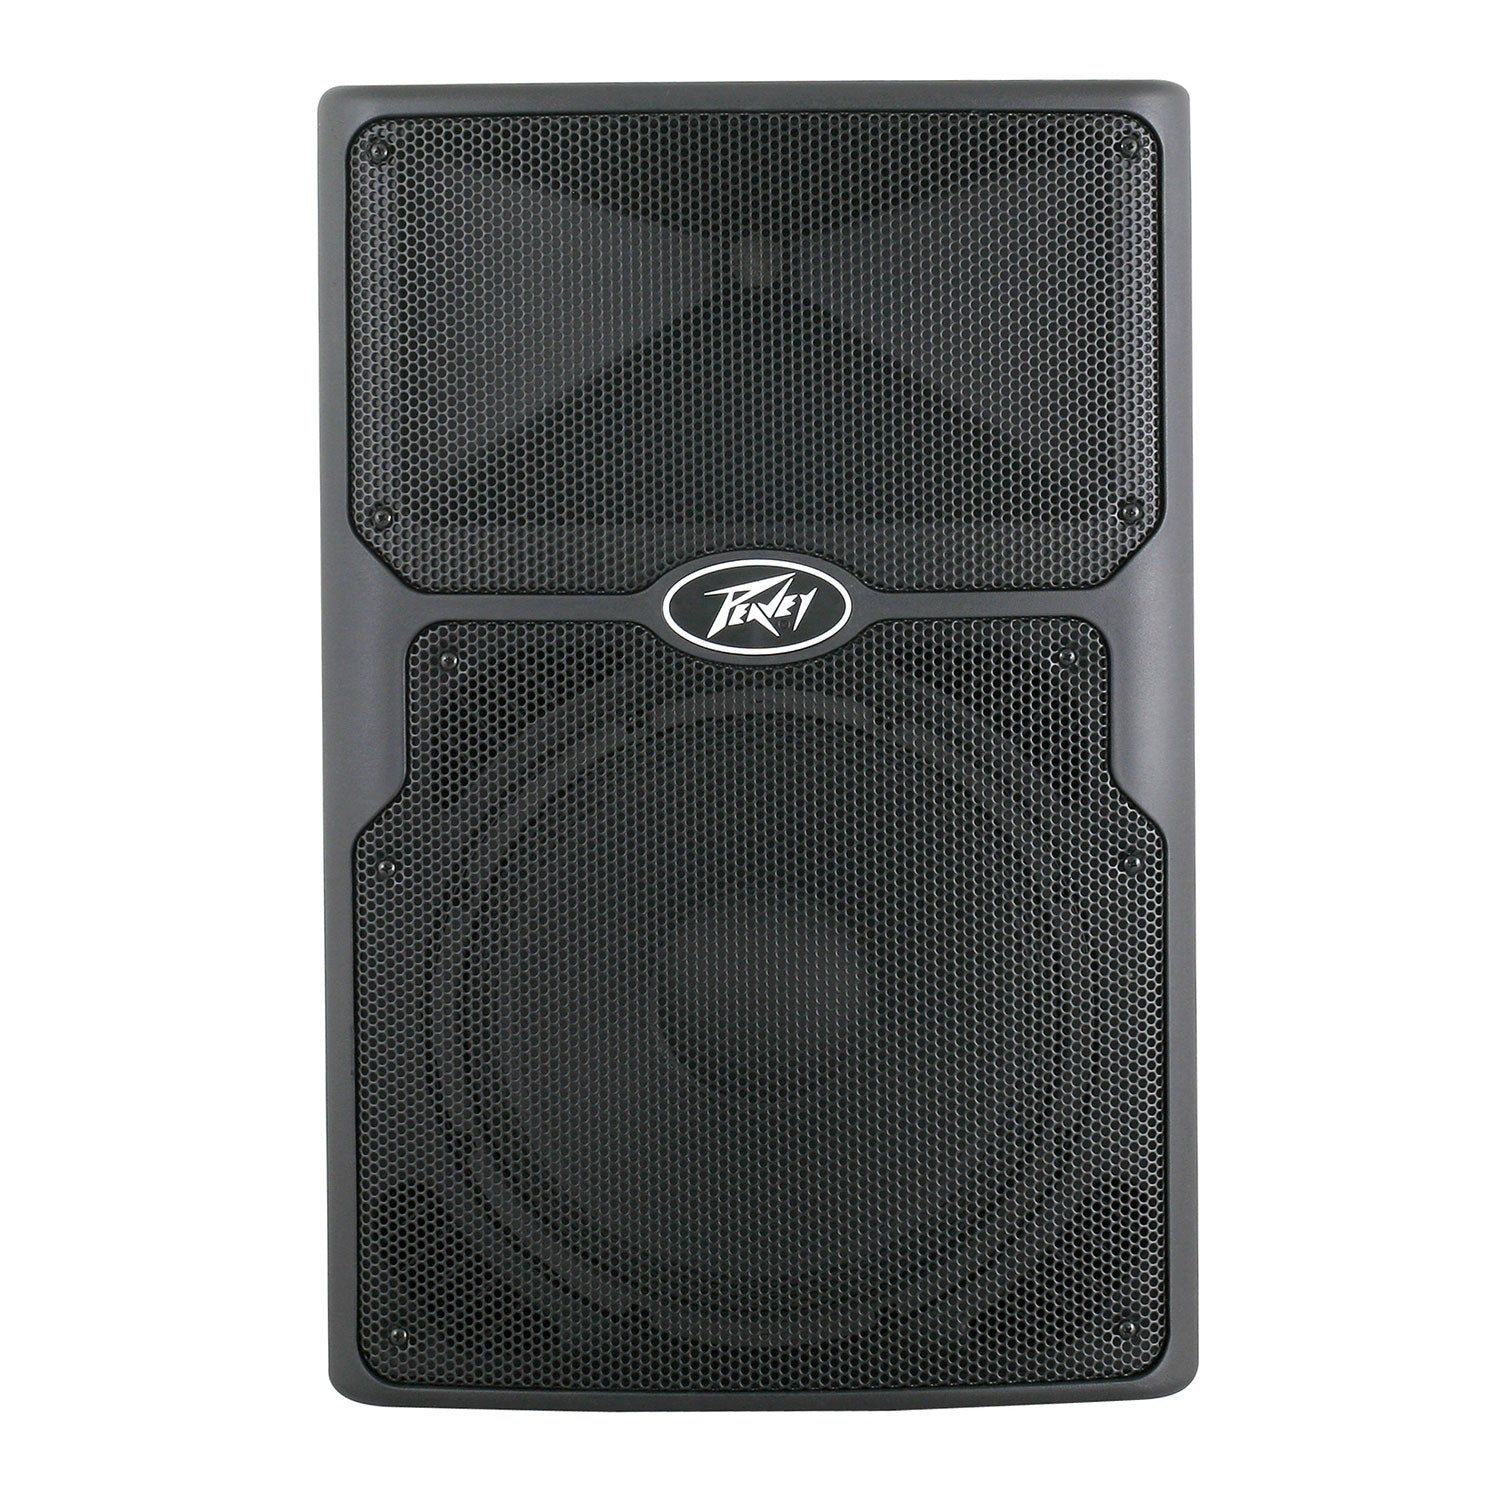 Peavey 03616470 PVXp15 DSP Loudspeaker with 15" Woofer-830 Watts-Music World Academy